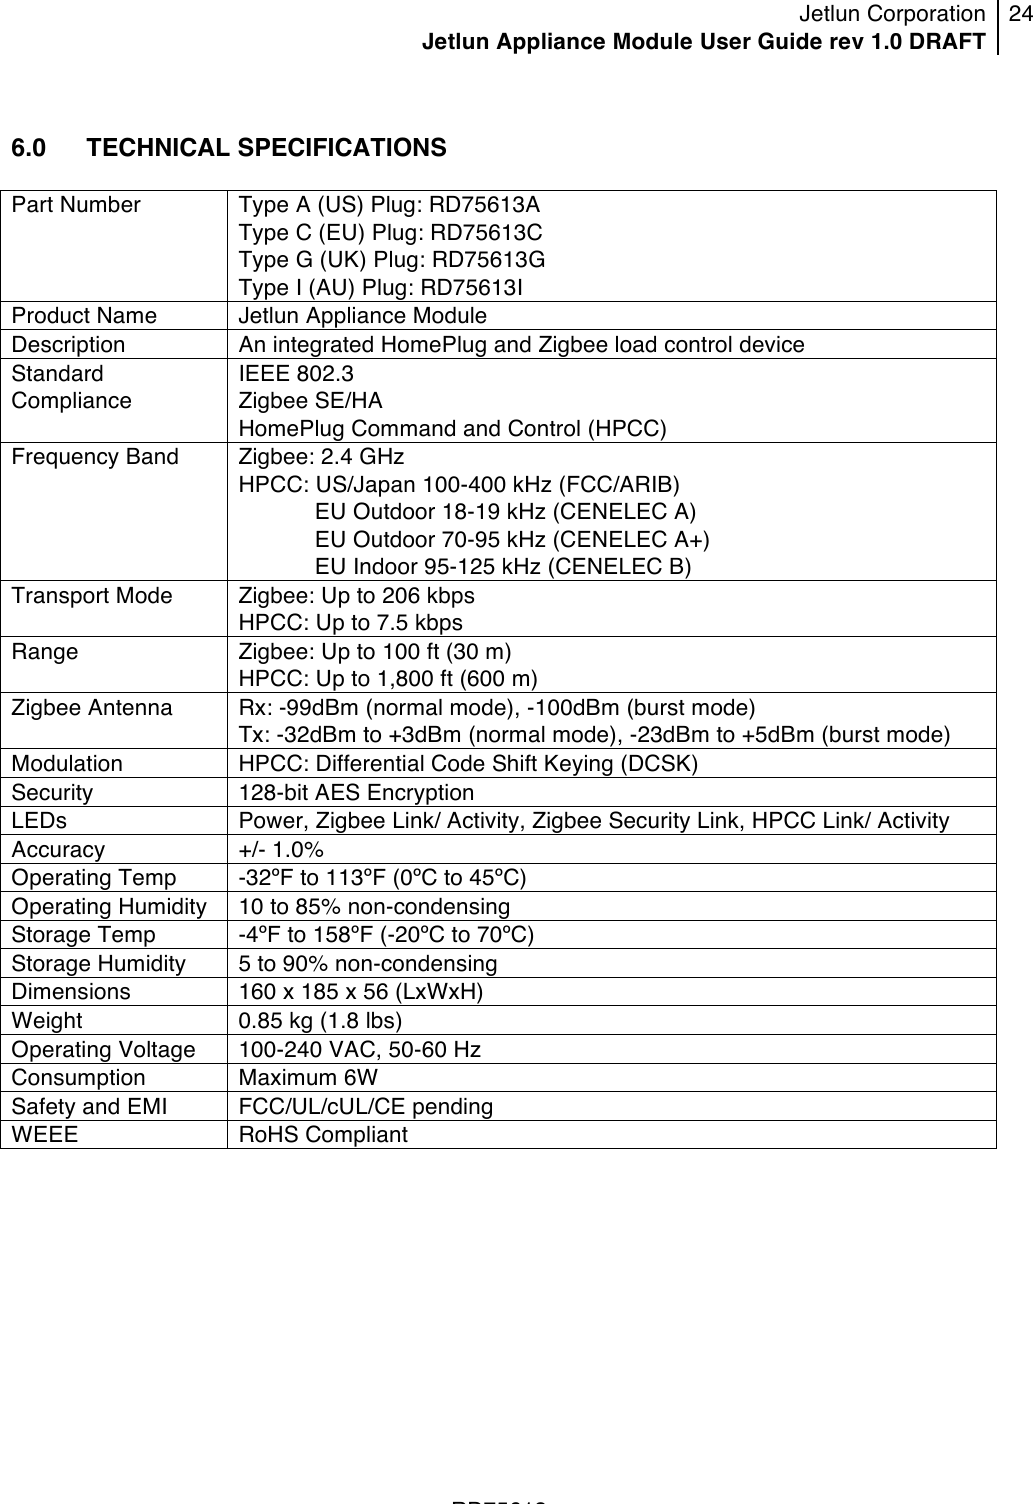 Jetlun Corporation Jetlun Appliance Module User Guide rev 1.0 DRAFT 24   !!!RD75613 !6.0   TECHNICAL SPECIFICATIONS  Part Number Type A (US) Plug: RD75613A Type C (EU) Plug: RD75613C Type G (UK) Plug: RD75613G Type I (AU) Plug: RD75613I Product Name Jetlun Appliance Module Description An integrated HomePlug and Zigbee load control device Standard Compliance IEEE 802.3 Zigbee SE/HA HomePlug Command and Control (HPCC) Frequency Band Zigbee: 2.4 GHz HPCC: US/Japan 100-400 kHz (FCC/ARIB)             EU Outdoor 18-19 kHz (CENELEC A)             EU Outdoor 70-95 kHz (CENELEC A+)             EU Indoor 95-125 kHz (CENELEC B) Transport Mode  Zigbee: Up to 206 kbps HPCC: Up to 7.5 kbps Range Zigbee: Up to 100 ft (30 m) HPCC: Up to 1,800 ft (600 m) Zigbee Antenna Rx: -99dBm (normal mode), -100dBm (burst mode) Tx: -32dBm to +3dBm (normal mode), -23dBm to +5dBm (burst mode) Modulation HPCC: Differential Code Shift Keying (DCSK) Security 128-bit AES Encryption LEDs Power, Zigbee Link/ Activity, Zigbee Security Link, HPCC Link/ Activity Accuracy +/- 1.0% Operating Temp -32ºF to 113ºF (0ºC to 45ºC) Operating Humidity 10 to 85% non-condensing Storage Temp -4ºF to 158ºF (-20ºC to 70ºC) Storage Humidity 5 to 90% non-condensing Dimensions 160 x 185 x 56 (LxWxH) Weight 0.85 kg (1.8 lbs) Operating Voltage 100-240 VAC, 50-60 Hz Consumption Maximum 6W Safety and EMI FCC/UL/cUL/CE pending WEEE RoHS Compliant 